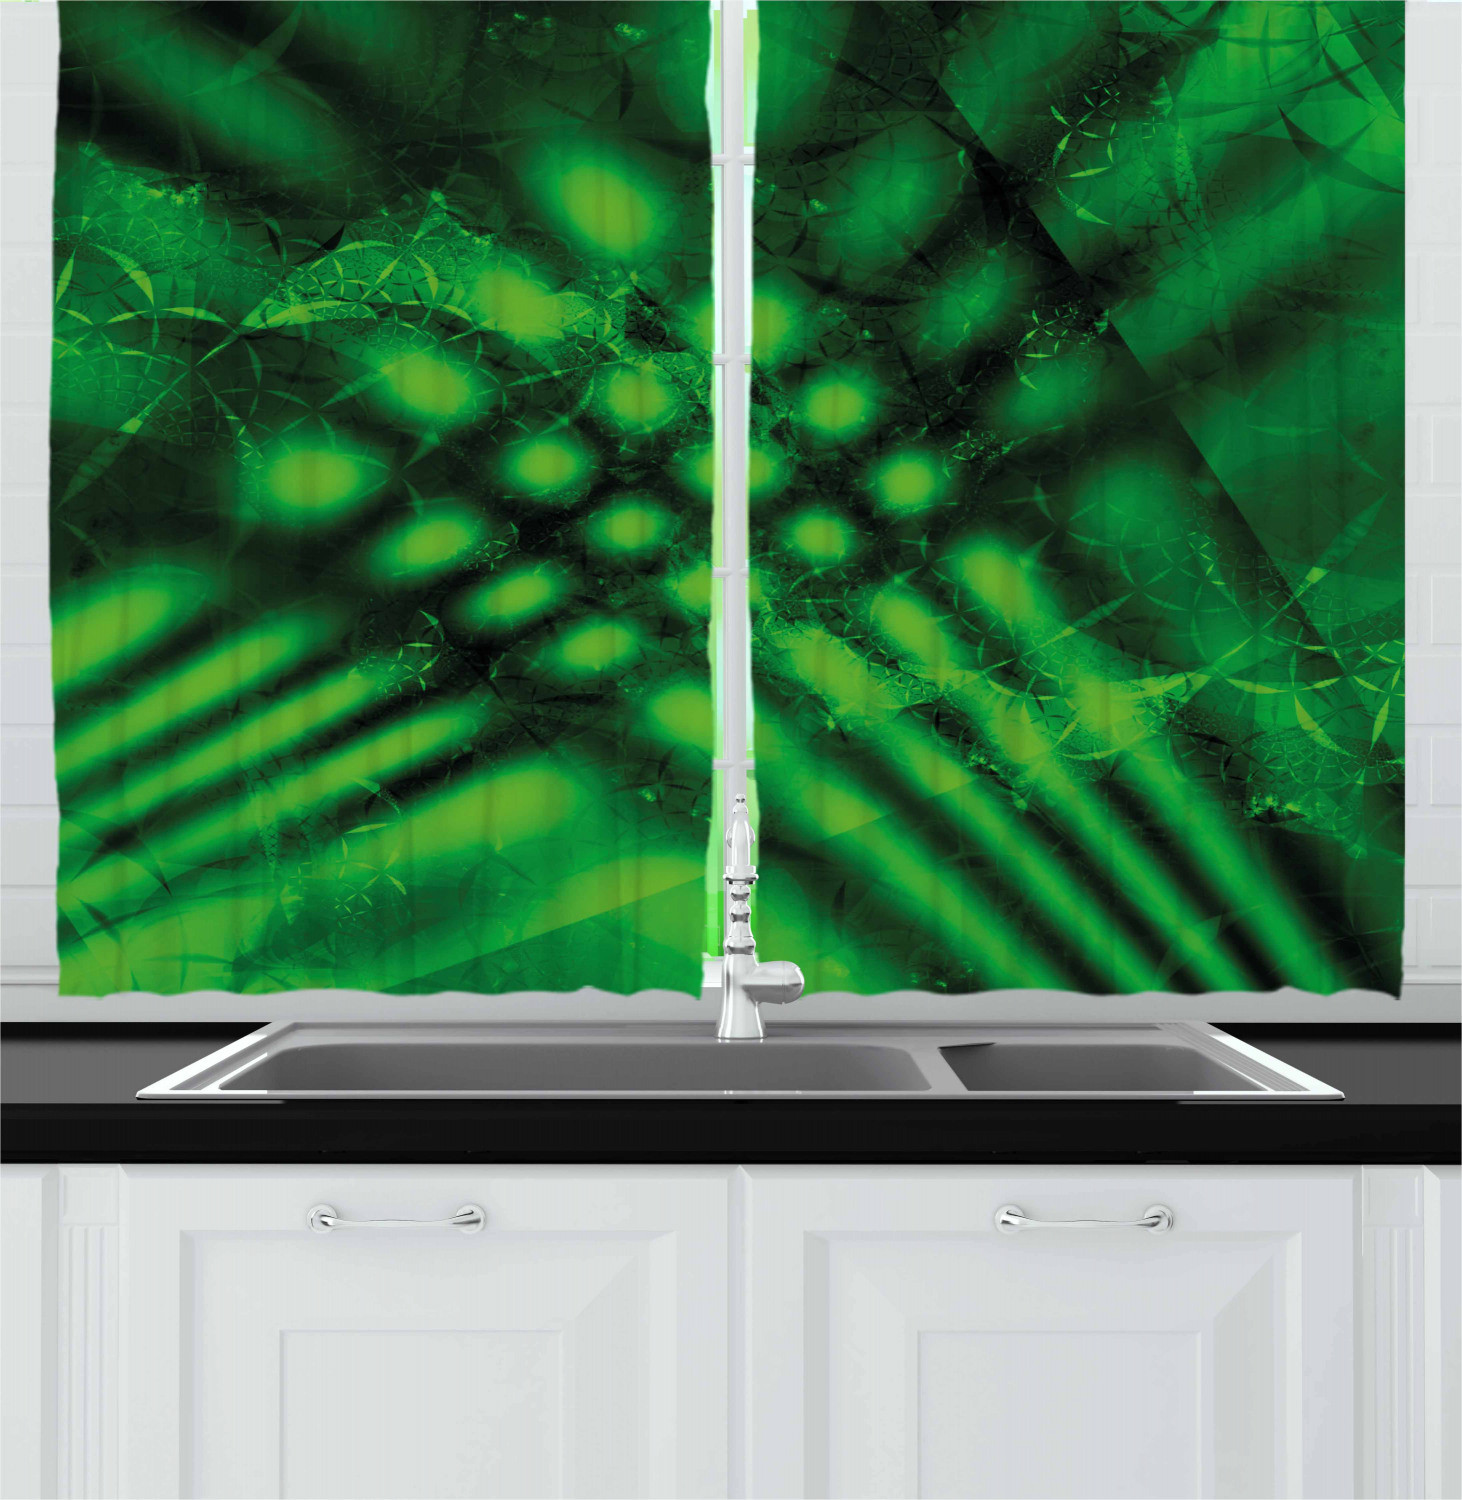 Lime Green Kitchen Curtains
 Lime Green Kitchen Curtains 2 Panel Set Window Drapes 55